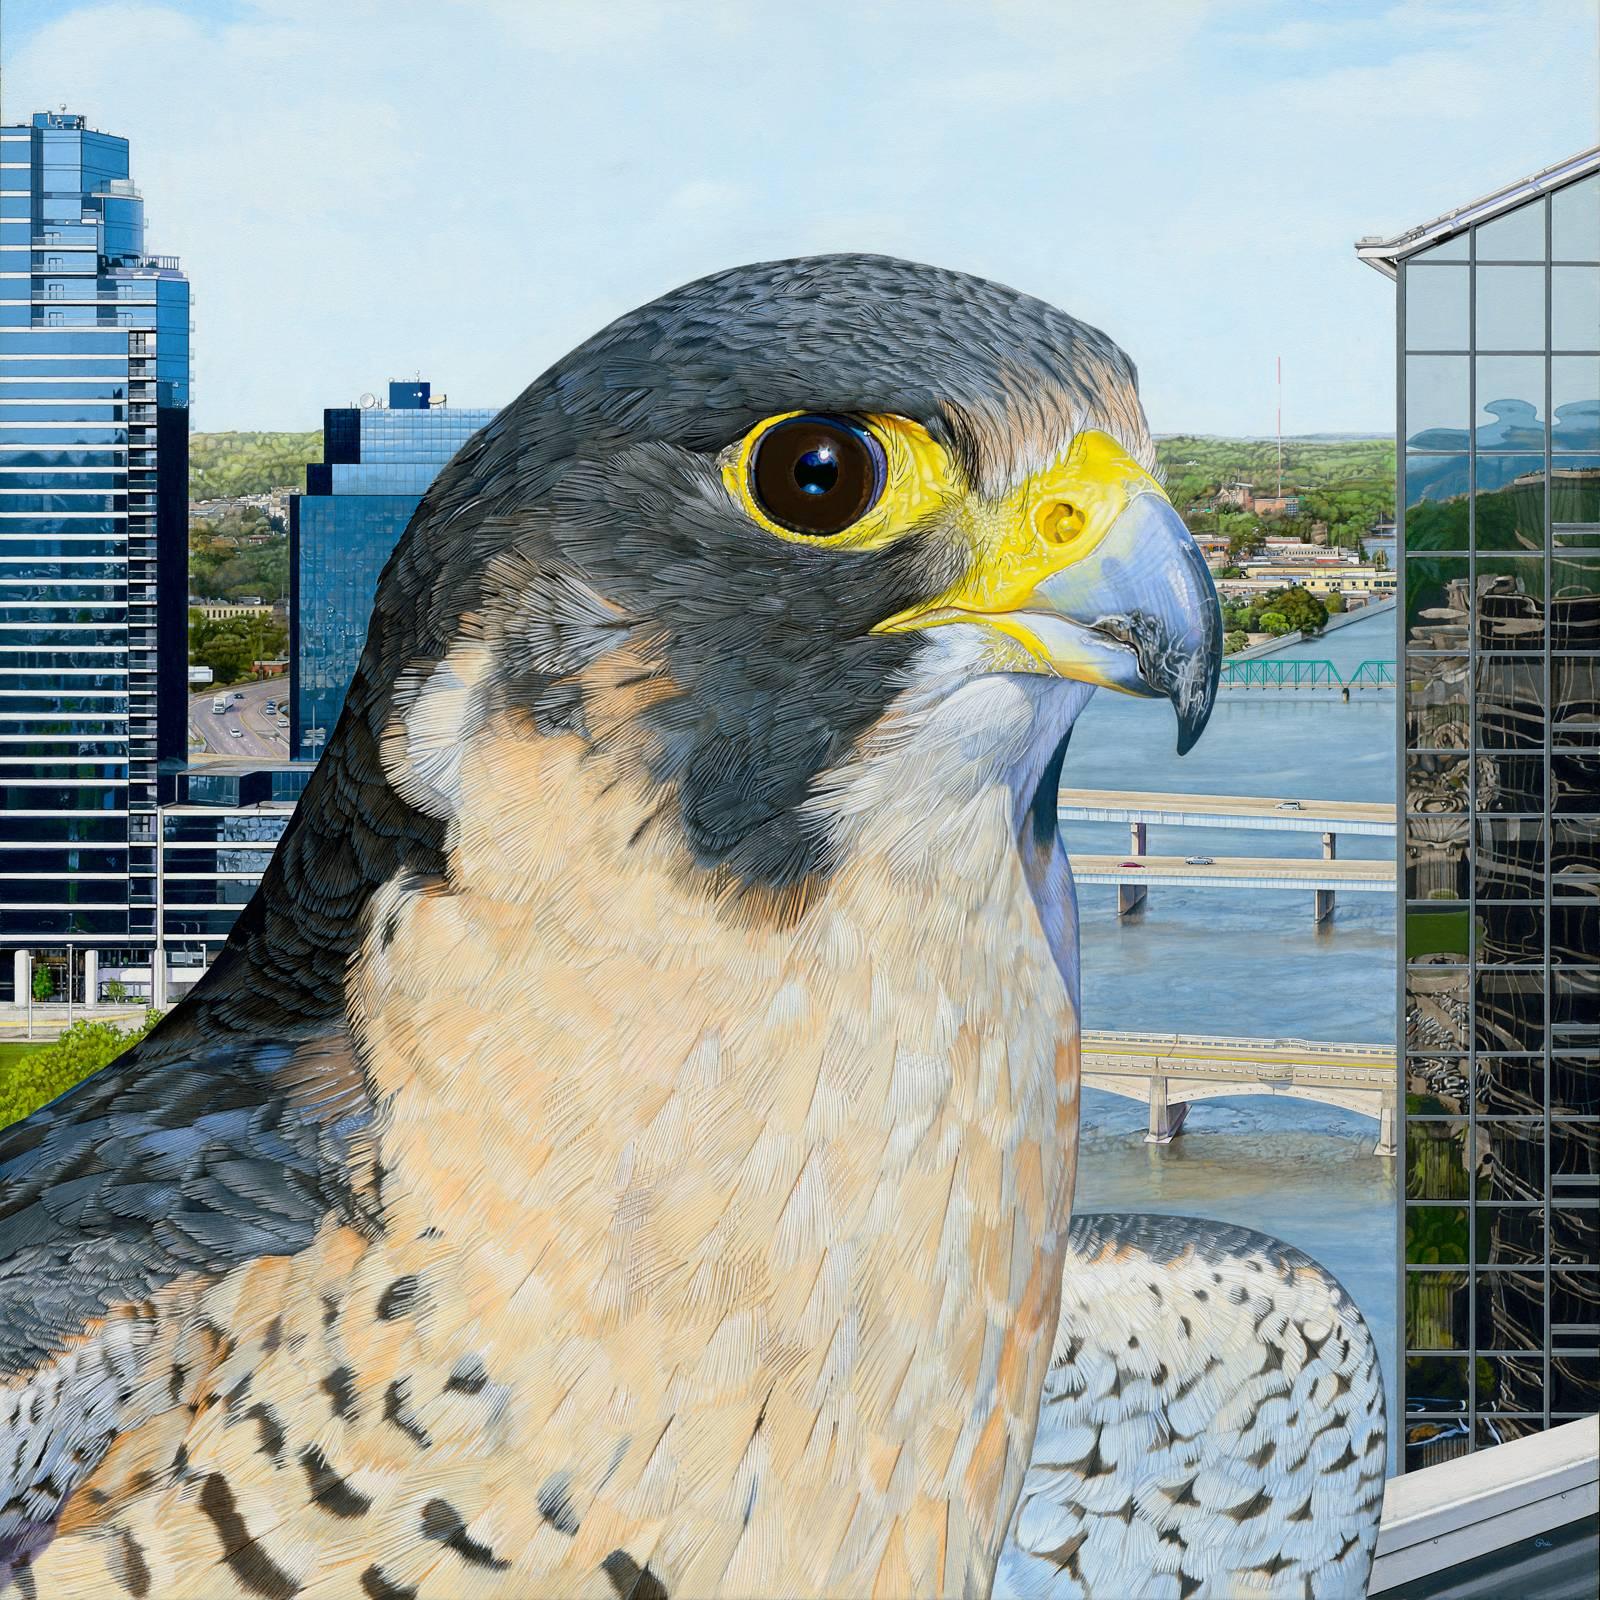 Peregrine City - Photorealist Painting of a Peregrine Falcon in an Urban Setting